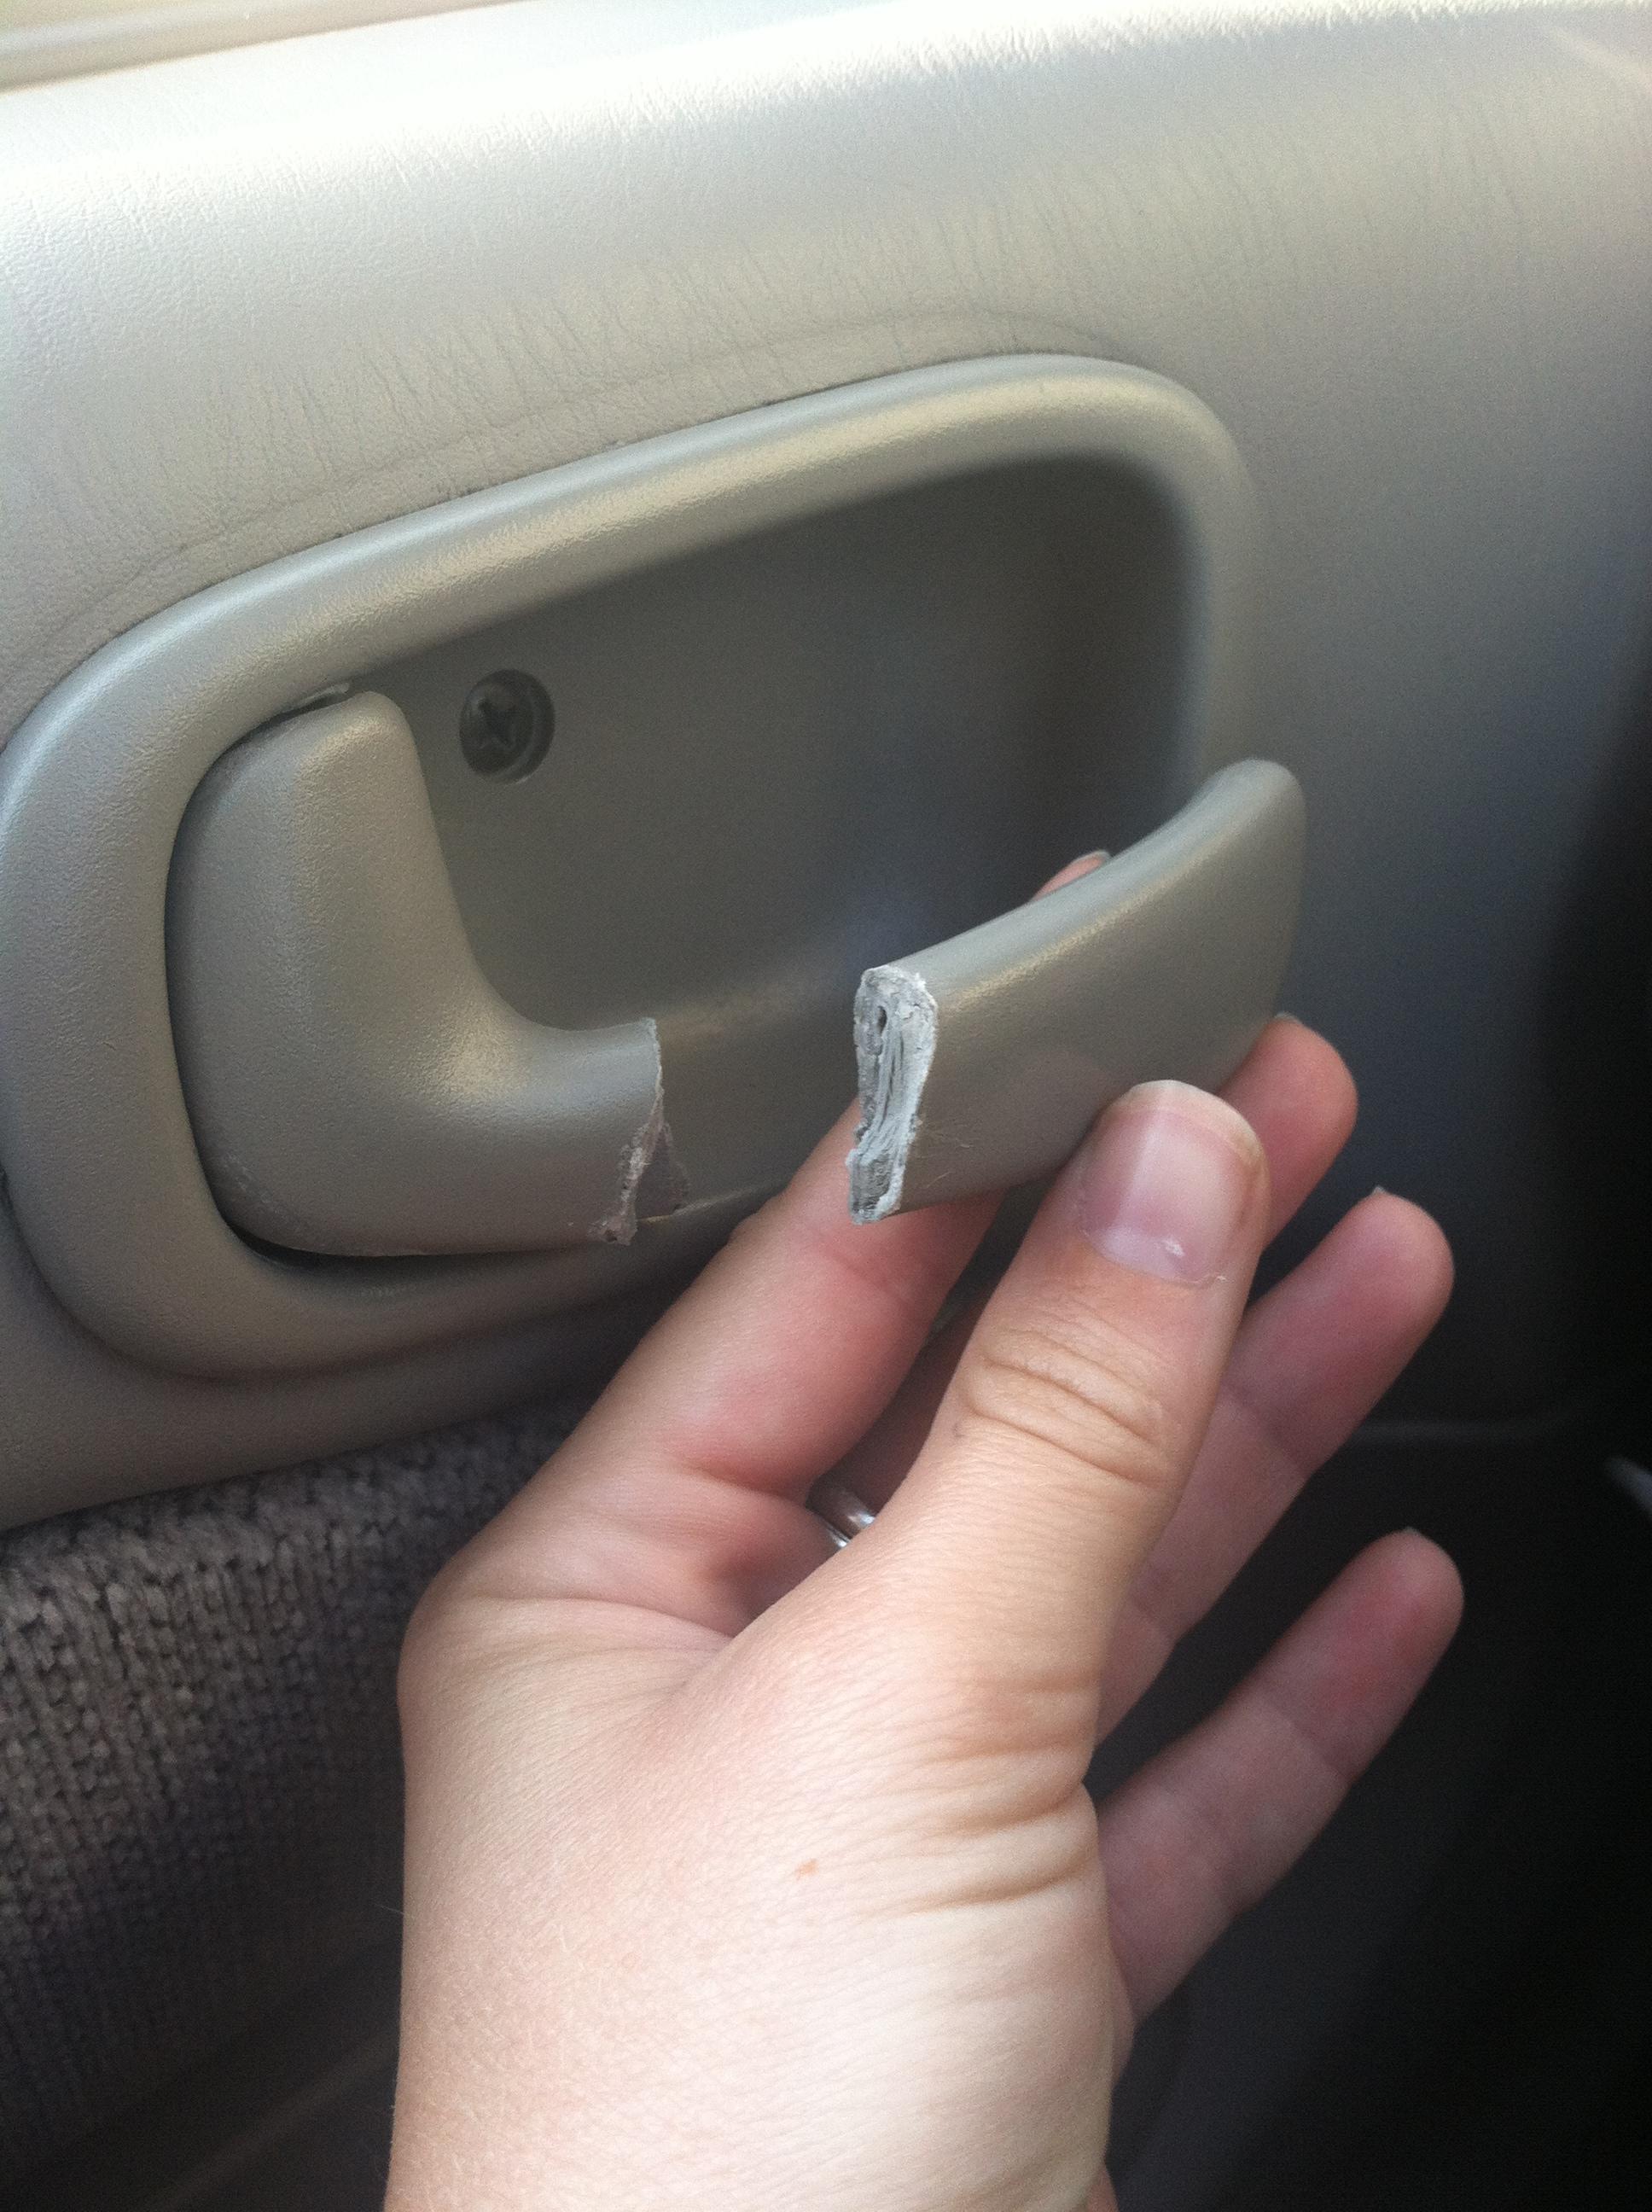 The shitty plastic door handle on my car broke off and they are ...